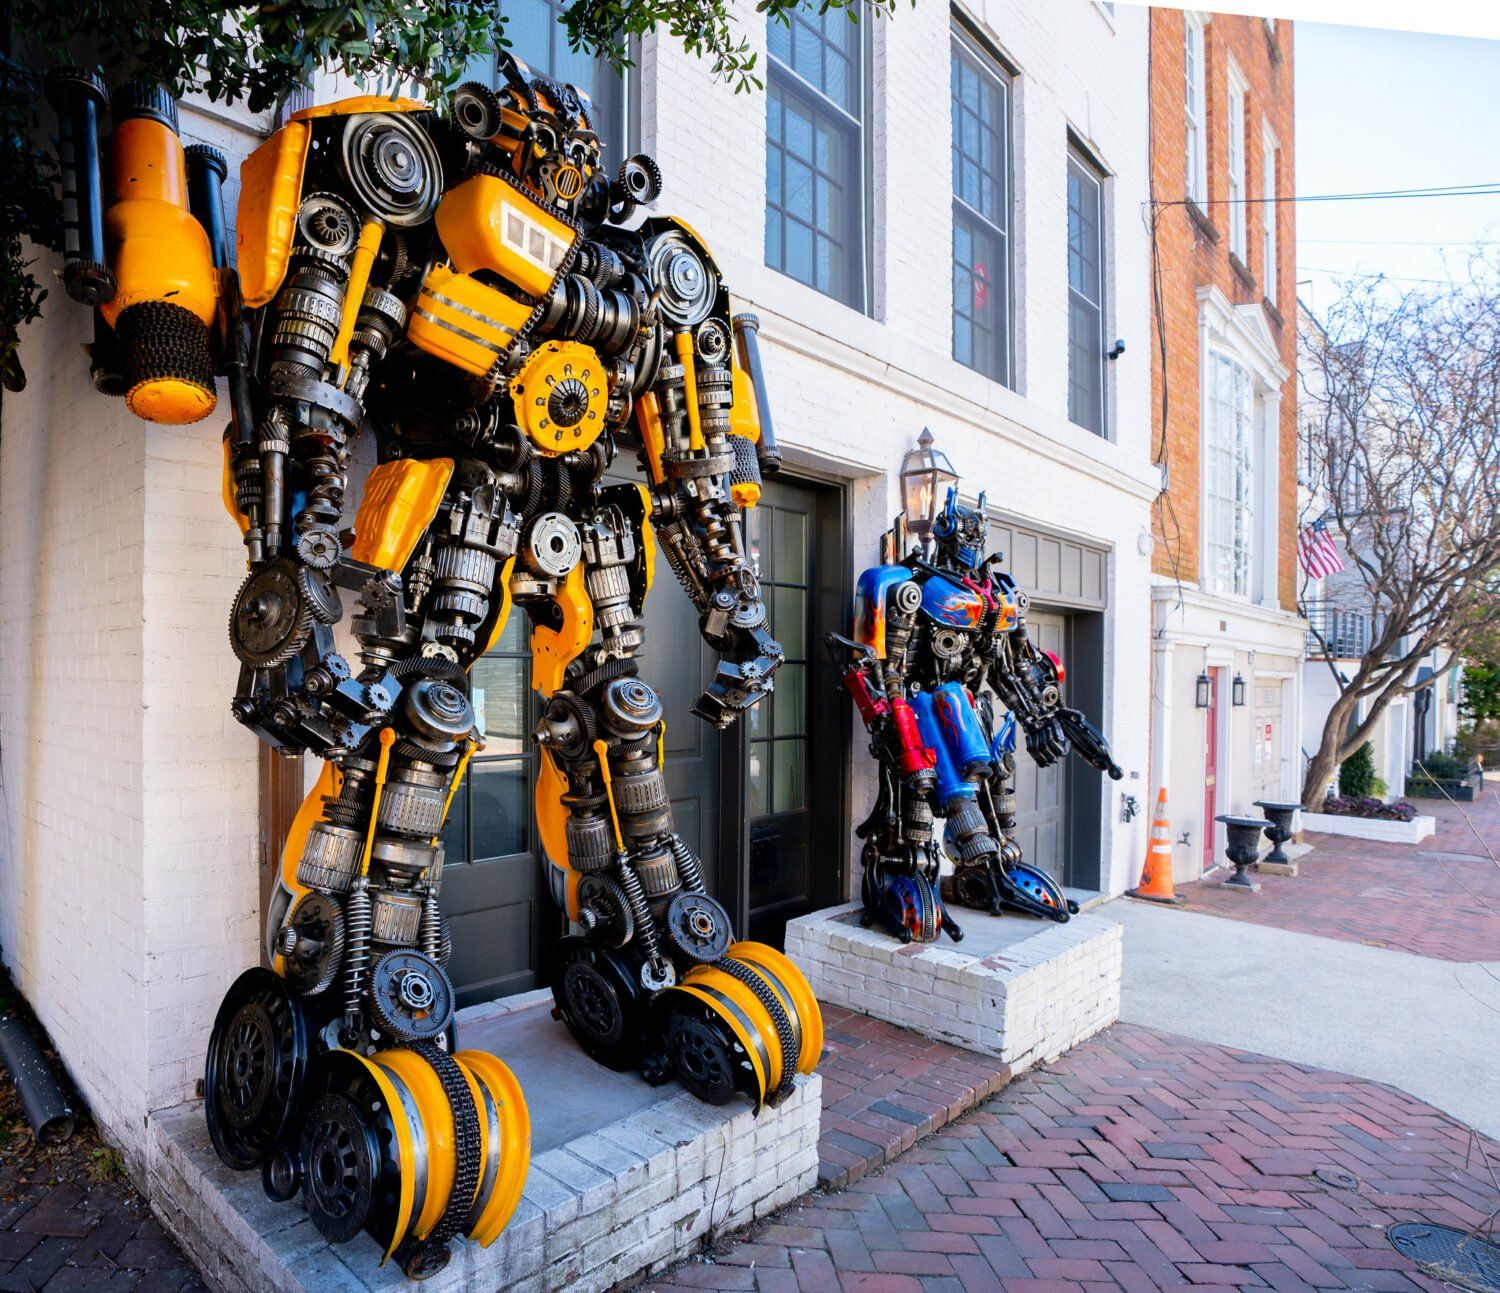 Two Huge Statues of Optimus Prime and Bumblebee of the Transformers in DC home must be removed